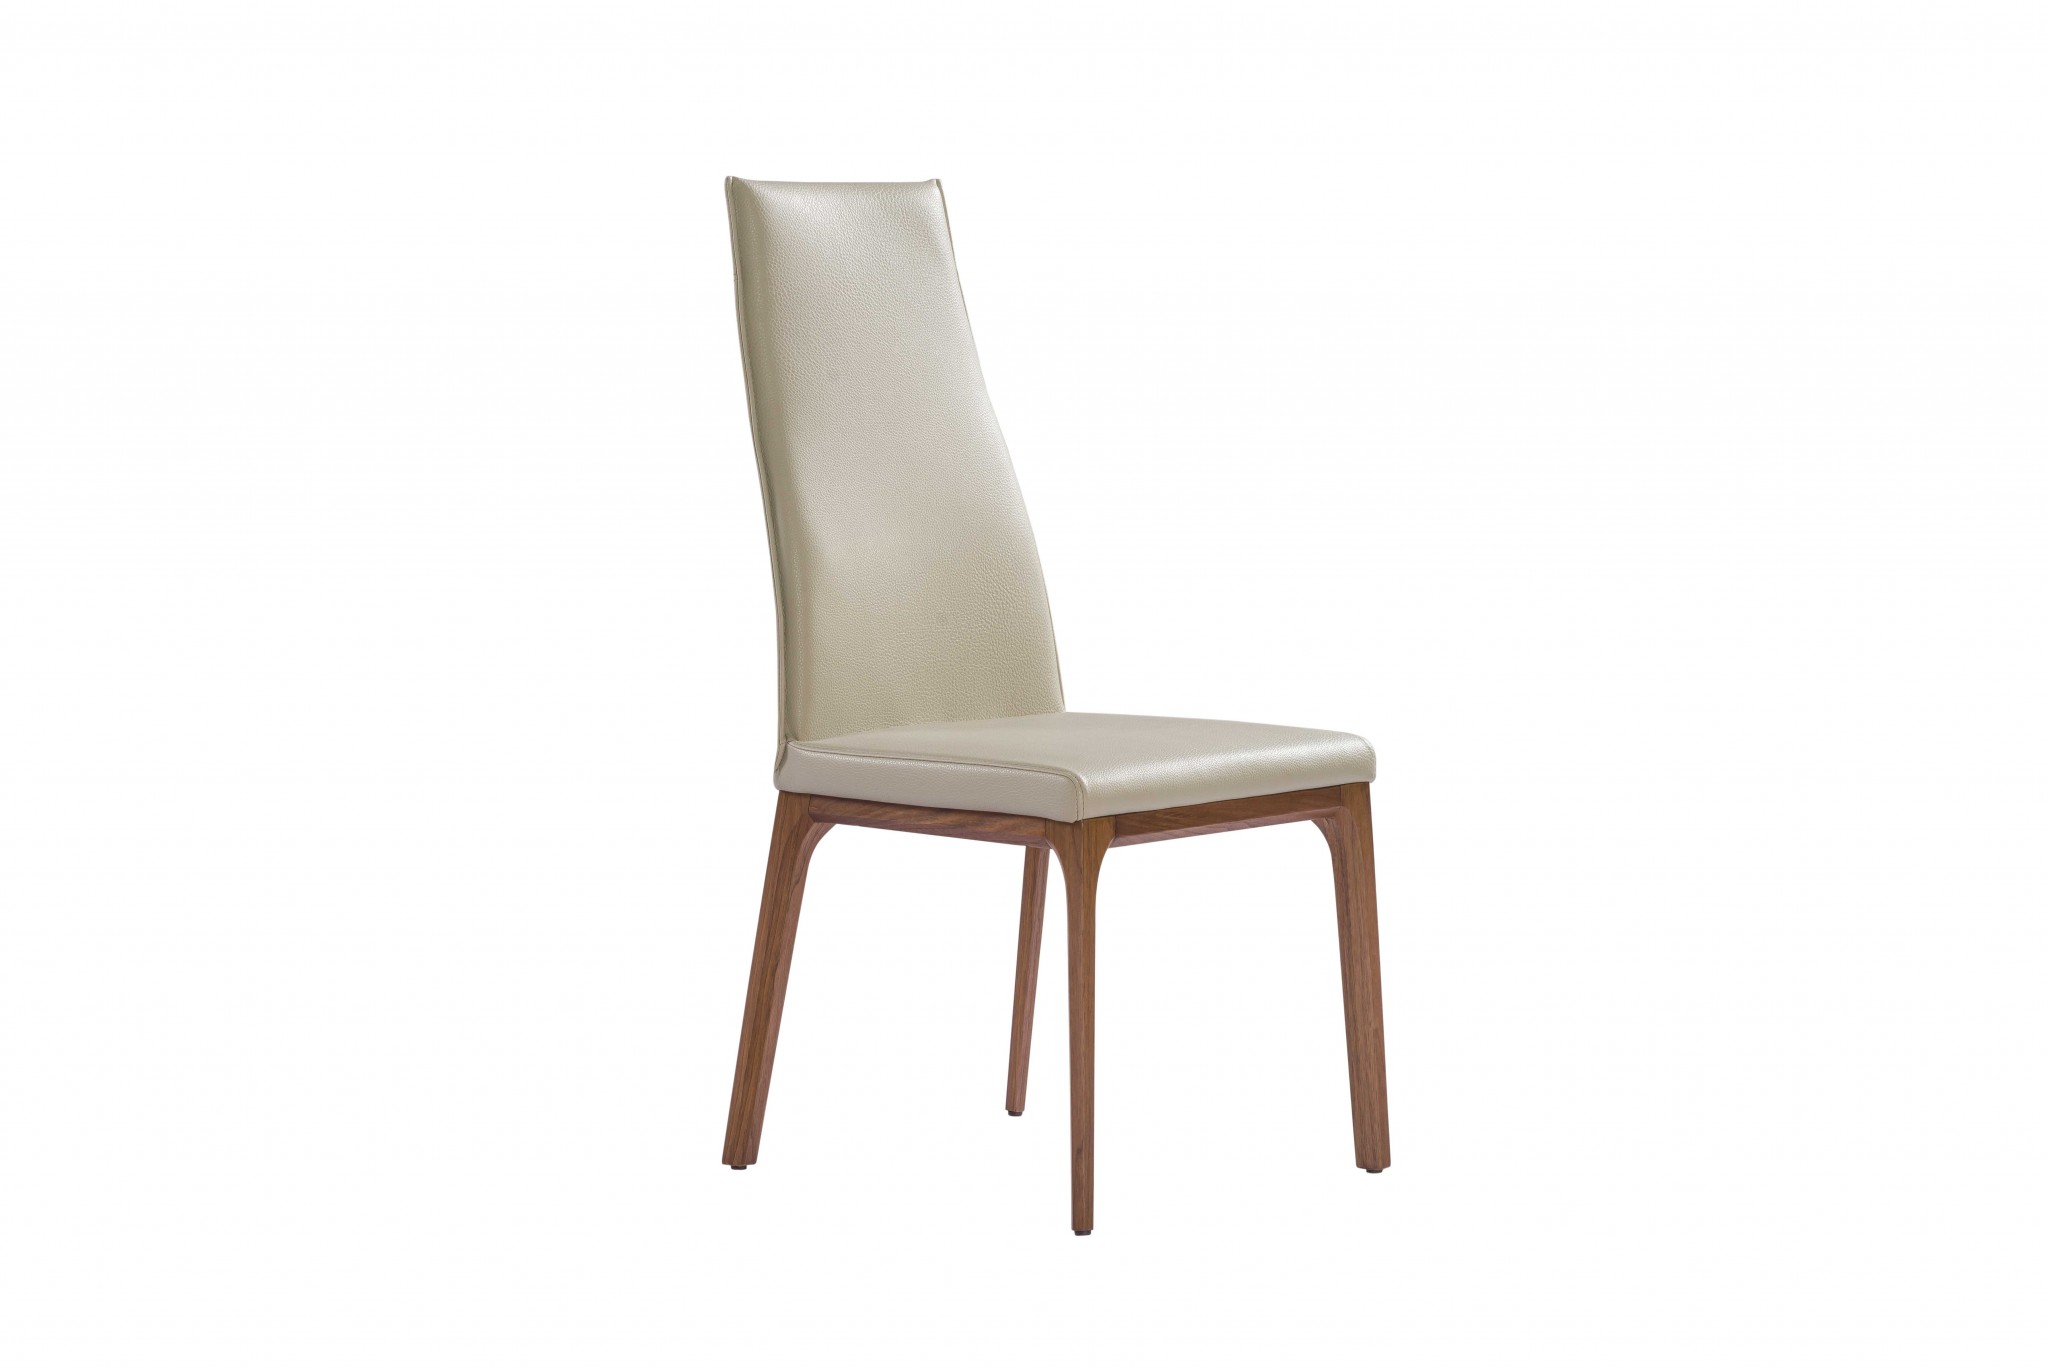 20" X 25" X 43" Taupe Faux Leather or Metal Dining Chair